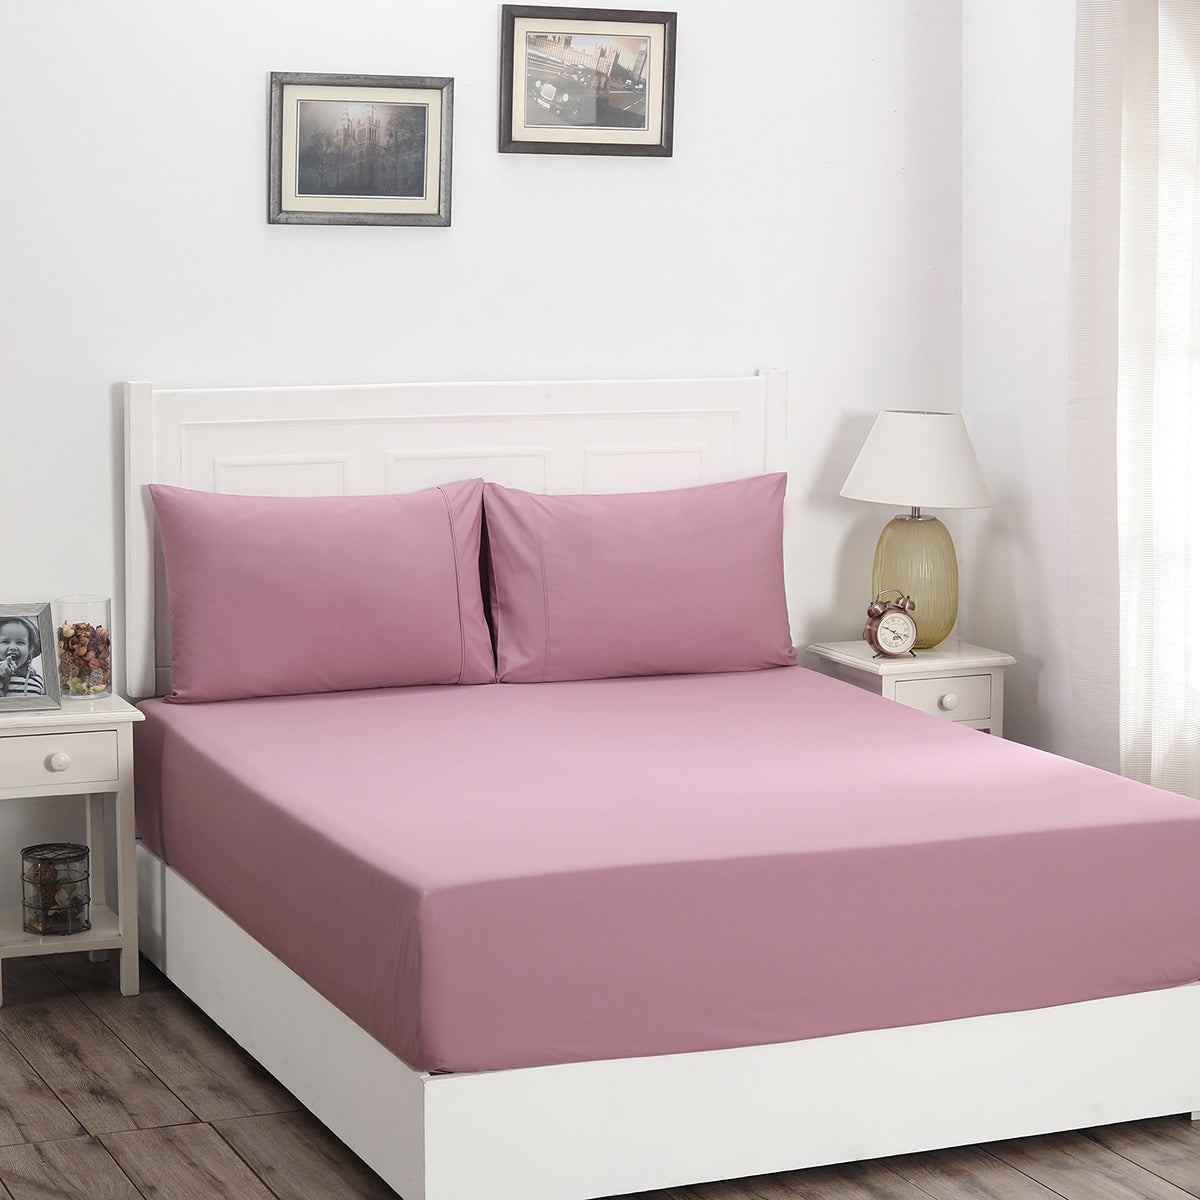 Fitted Bedsheet Supplier Near Me In India, For Home at Rs 400/piece in  Panipat